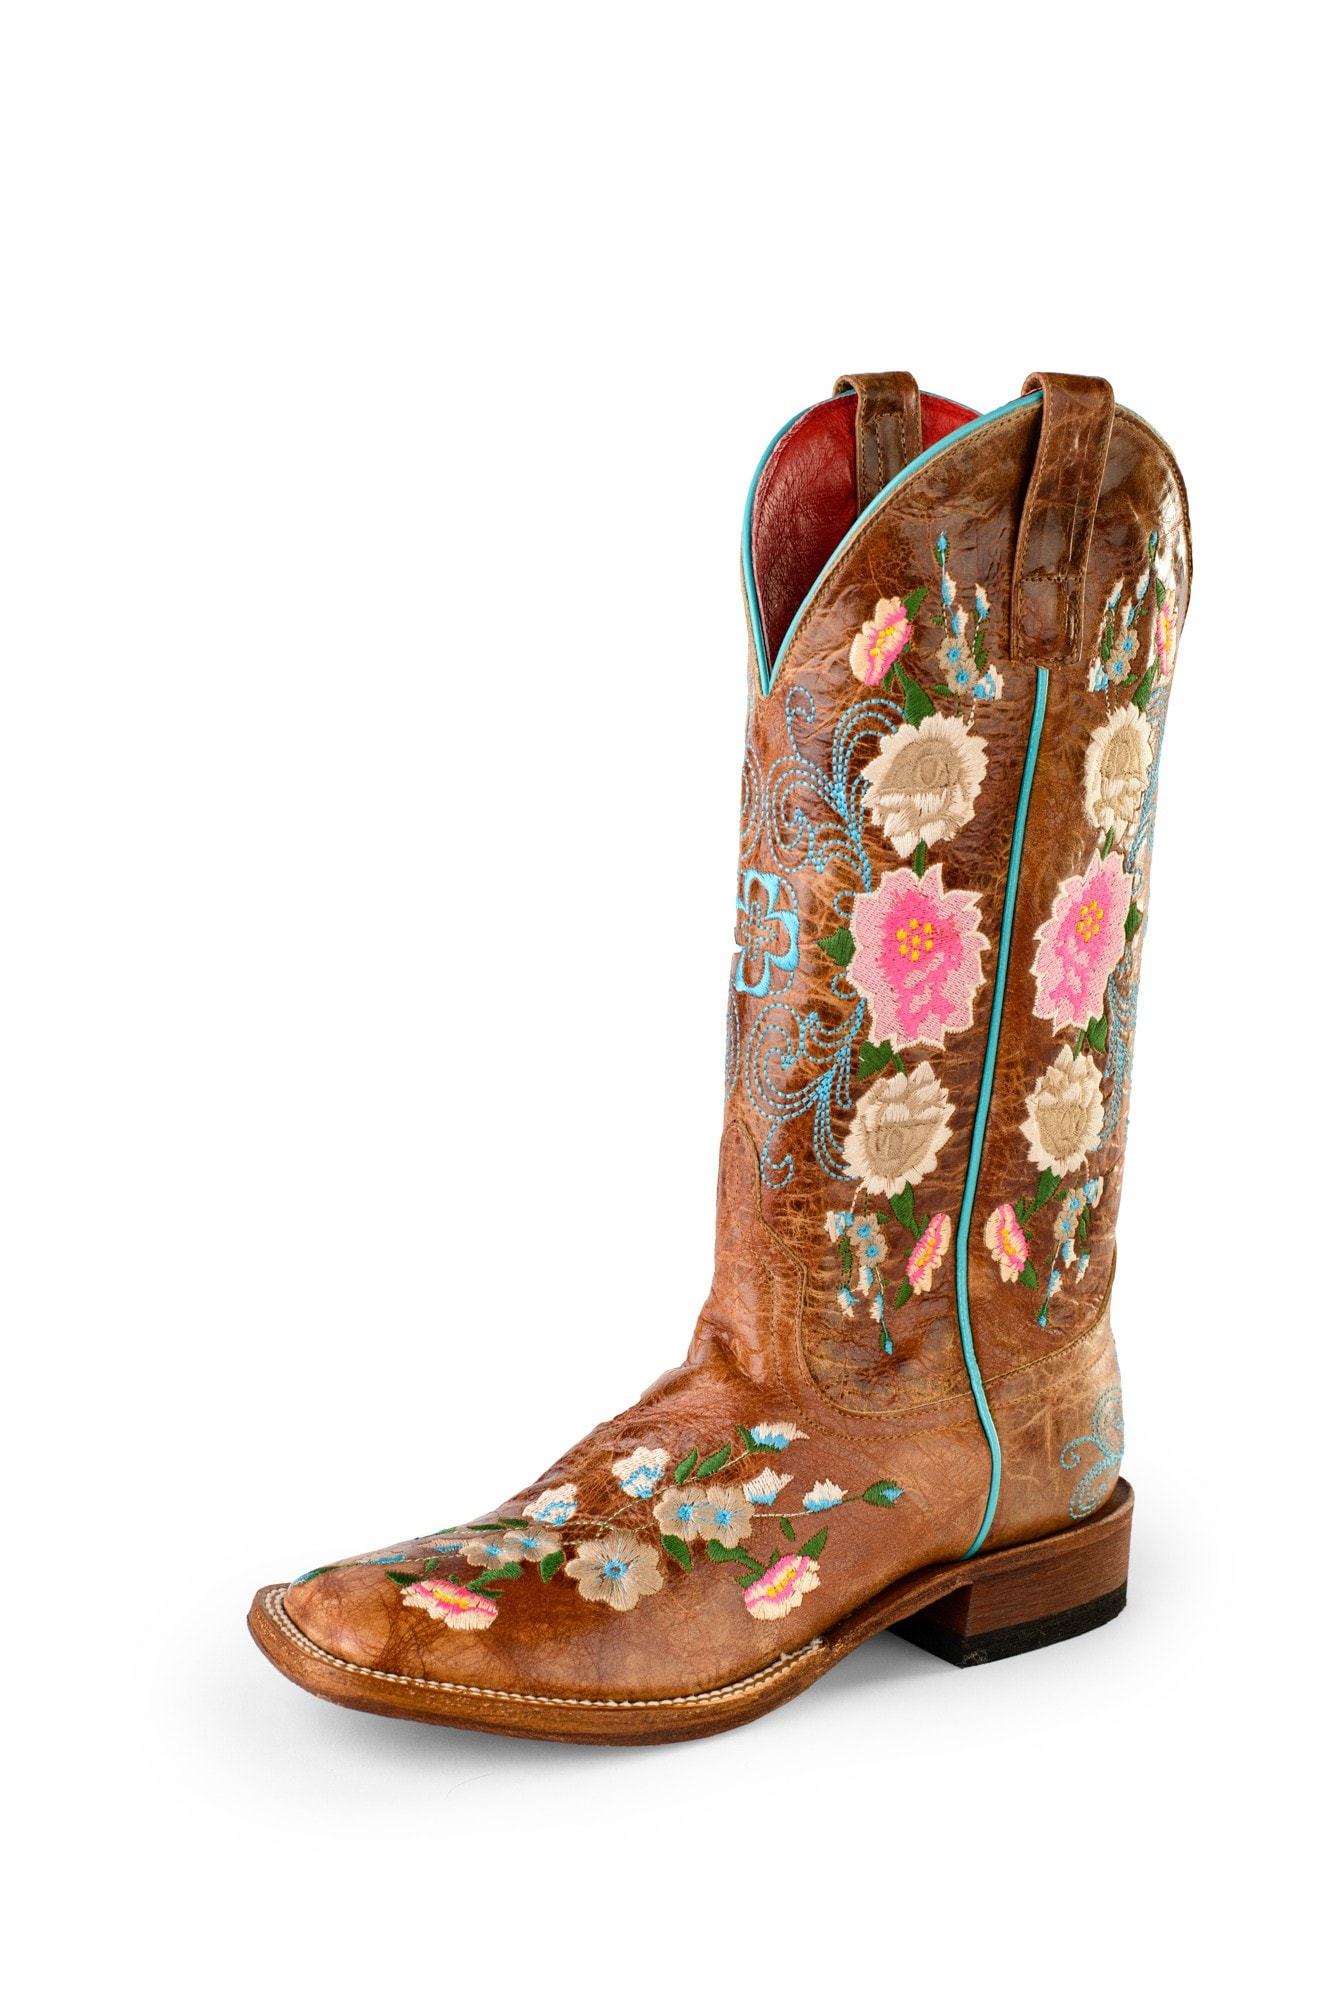 Macie Bean by Anderson Bean Womens Honey Leather Cowboy Boots Floral ...